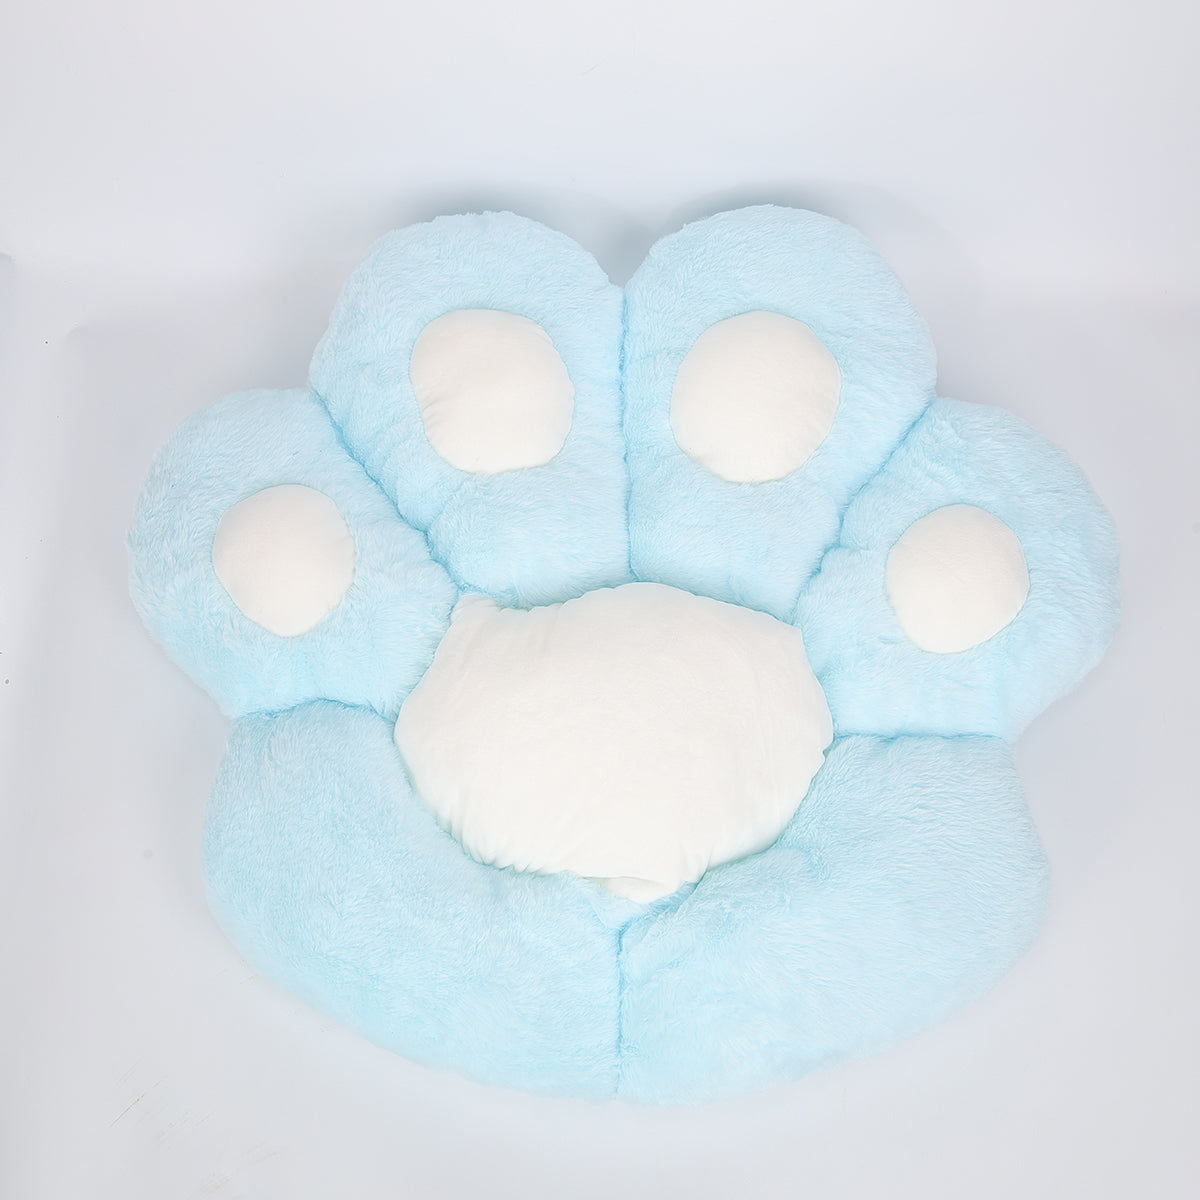 「Debut Sale」Colorful Cat Paw Cushion Series 2 Blue Pink Kitty Cat Paw Chair Cushion Pad（Pre-order） - Aixini Toys